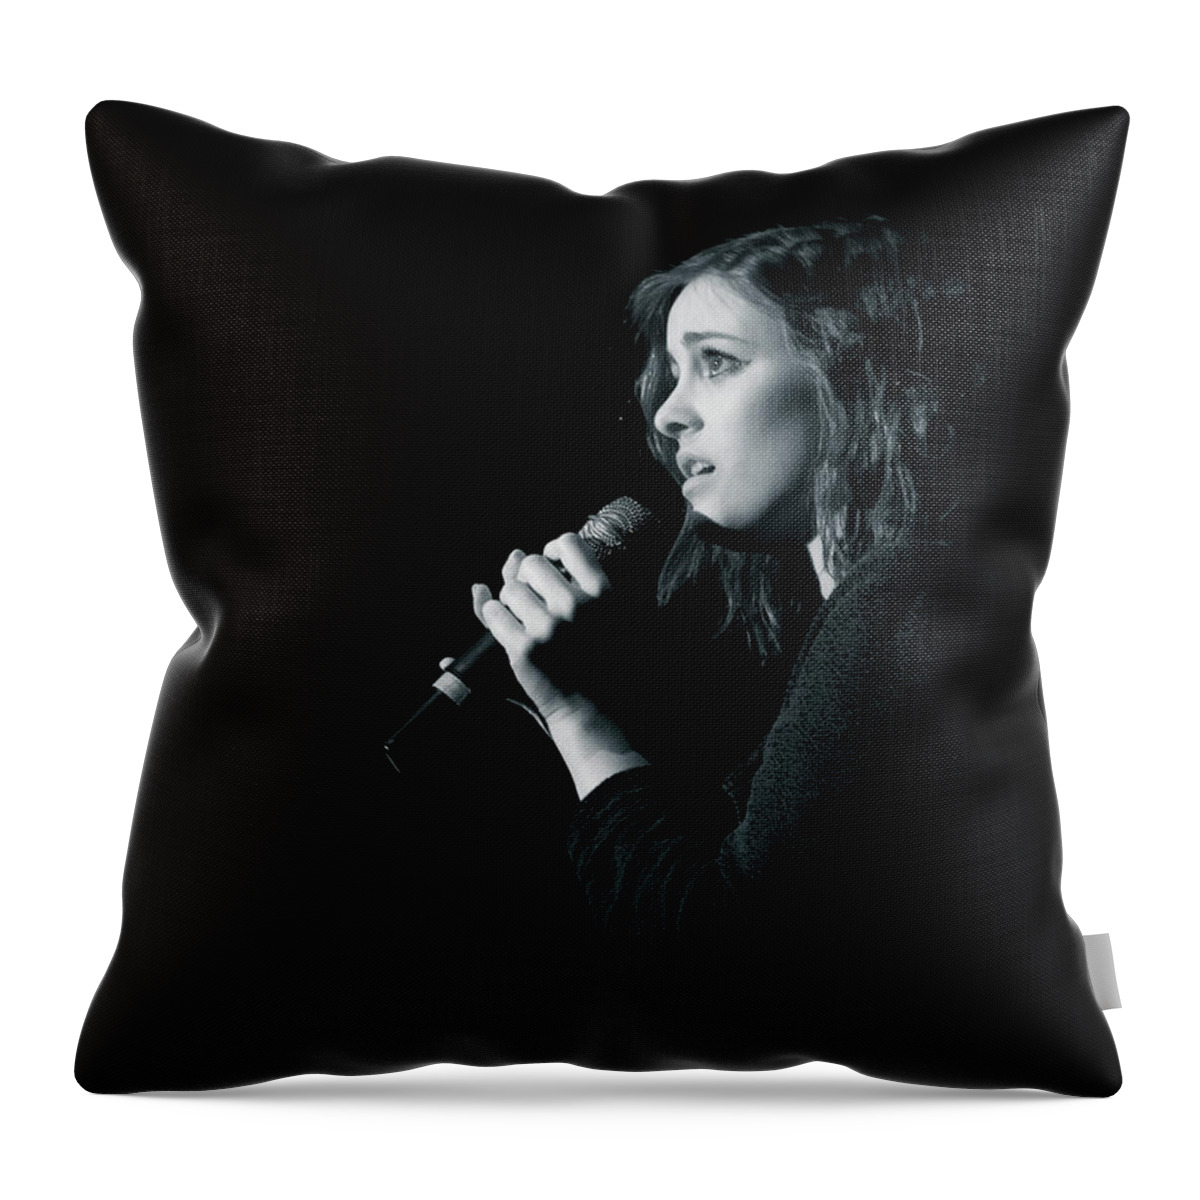  Throw Pillow featuring the photograph Tpa001 by Andy Smetzer